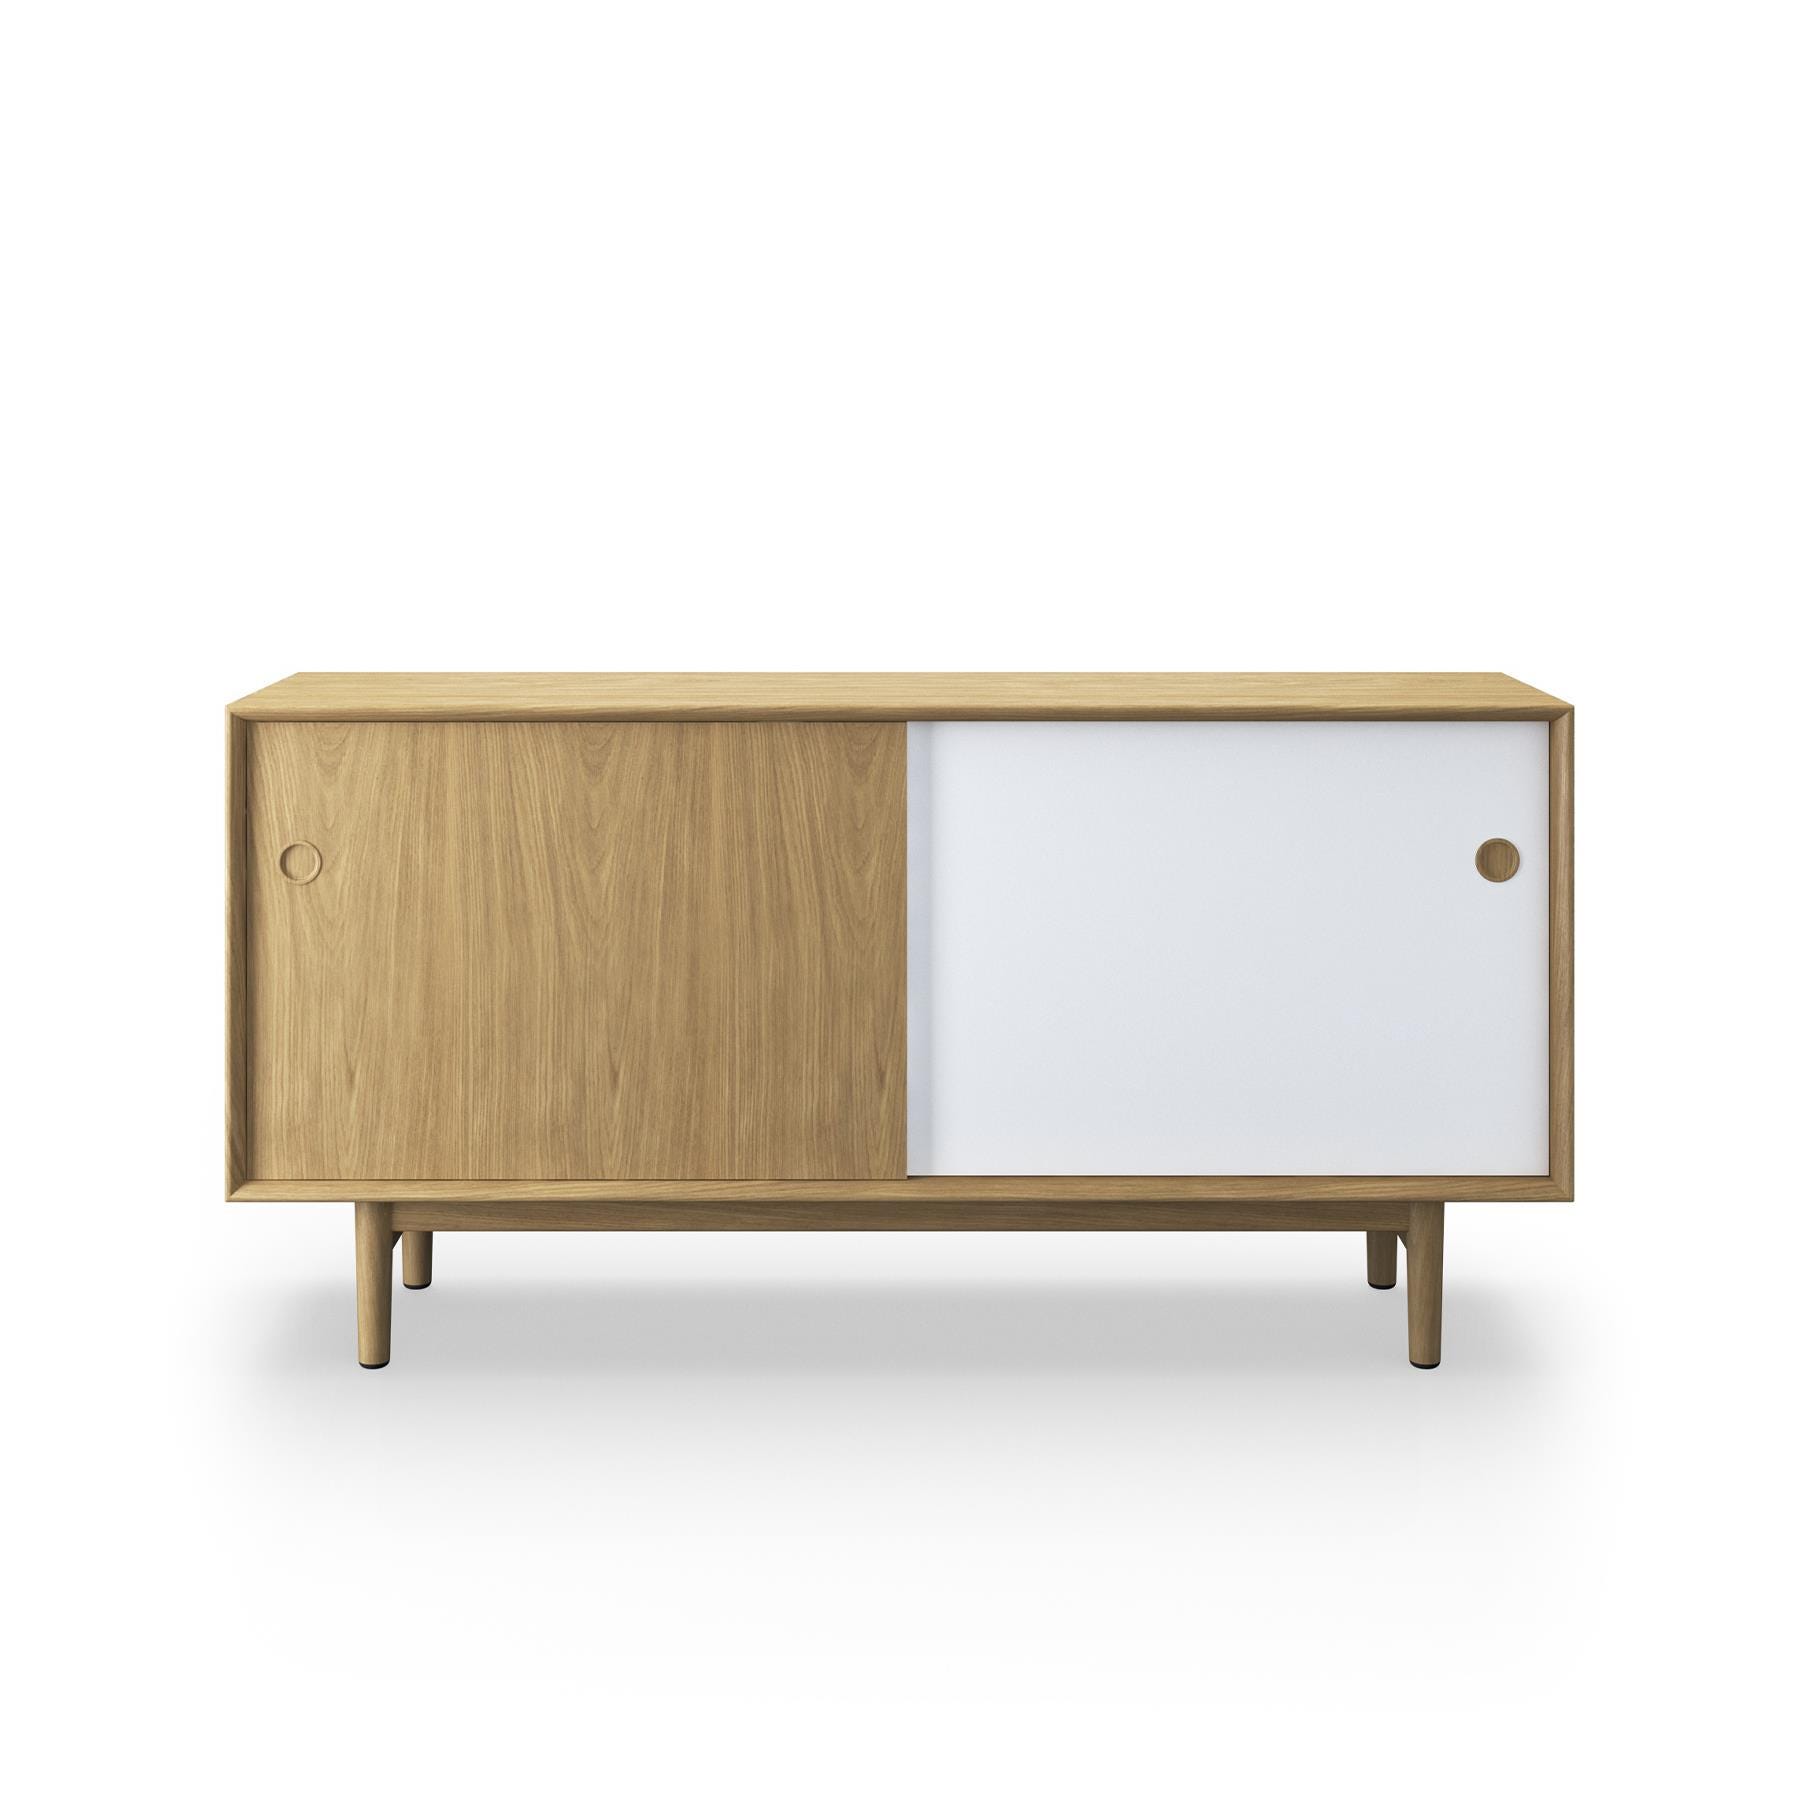 Sibast No 11 Sideboard White Oiled Oak White And Natural Front Wooden Legs Light Wood Designer Furniture From Holloways Of Ludlow